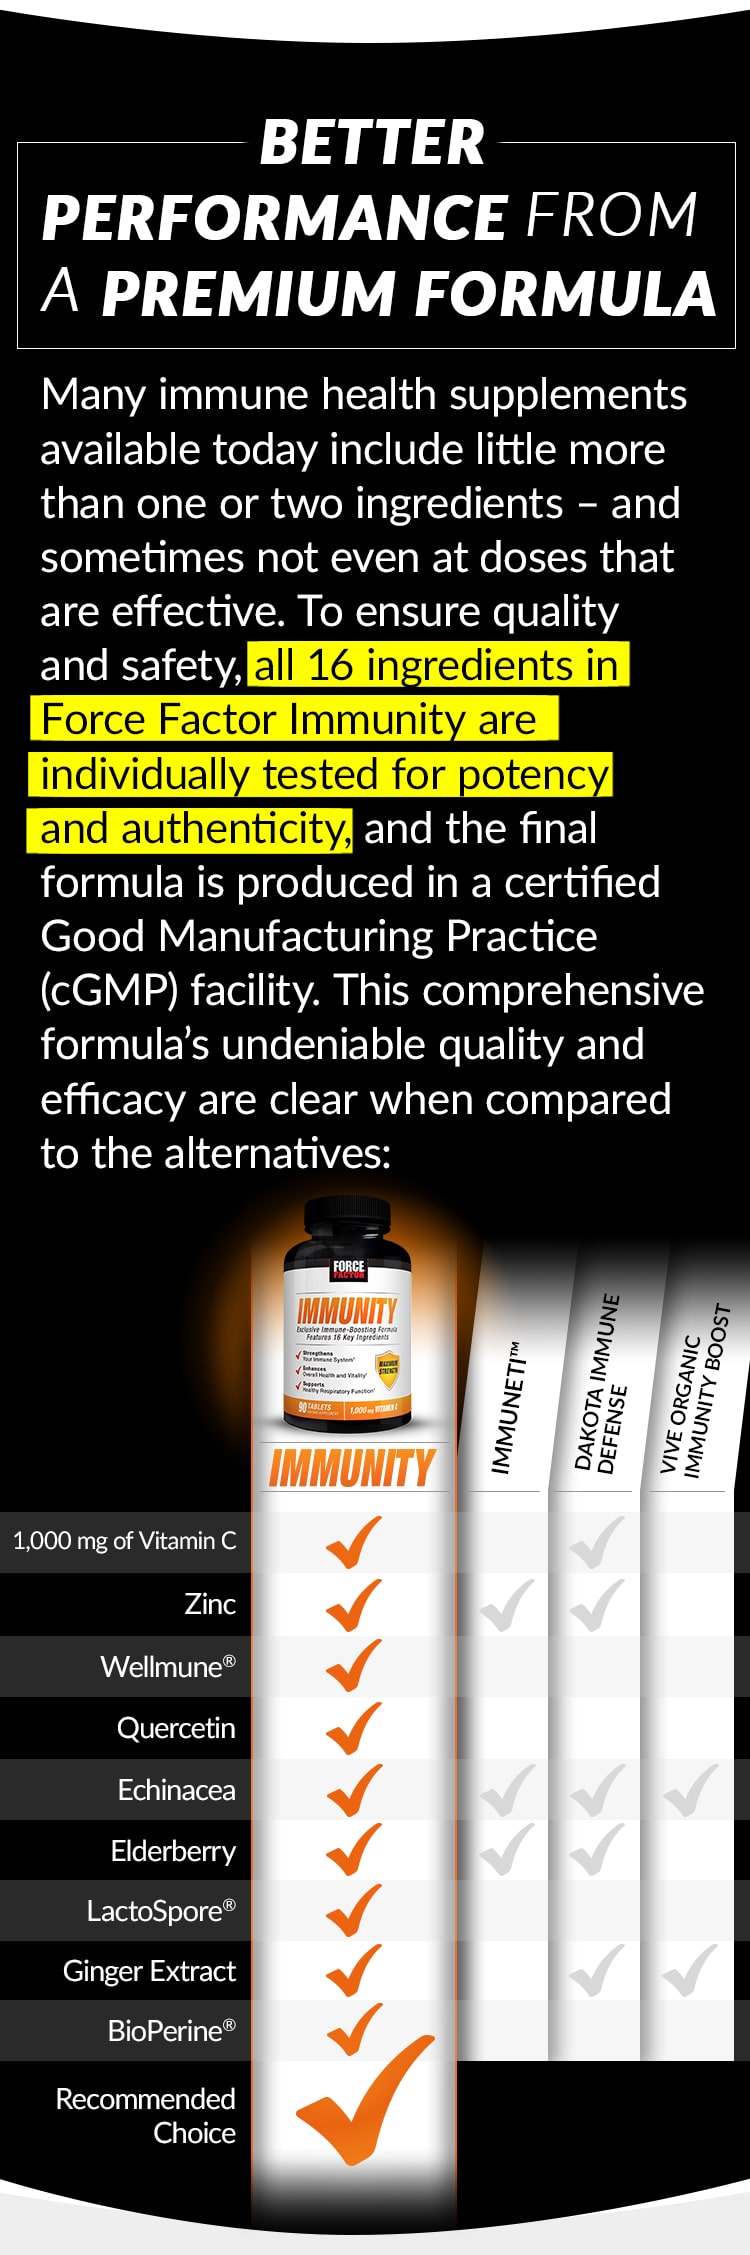 BETTER PERFORMANCE FROM A PREMIUM FORMULA. Many immune health supplements available today include little more than one or two ingredients – and sometimes not even at doses that are effective. To ensure quality and safety, all 16 ingredients in Force Factor Immunity are individually tested for potency and authenticity, and the final formula is produced in a certified Good Manufacturing Practice (cGMP) facility. This comprehensive formula’s undeniable quality and efficacy are clear when compared to the alternatives: